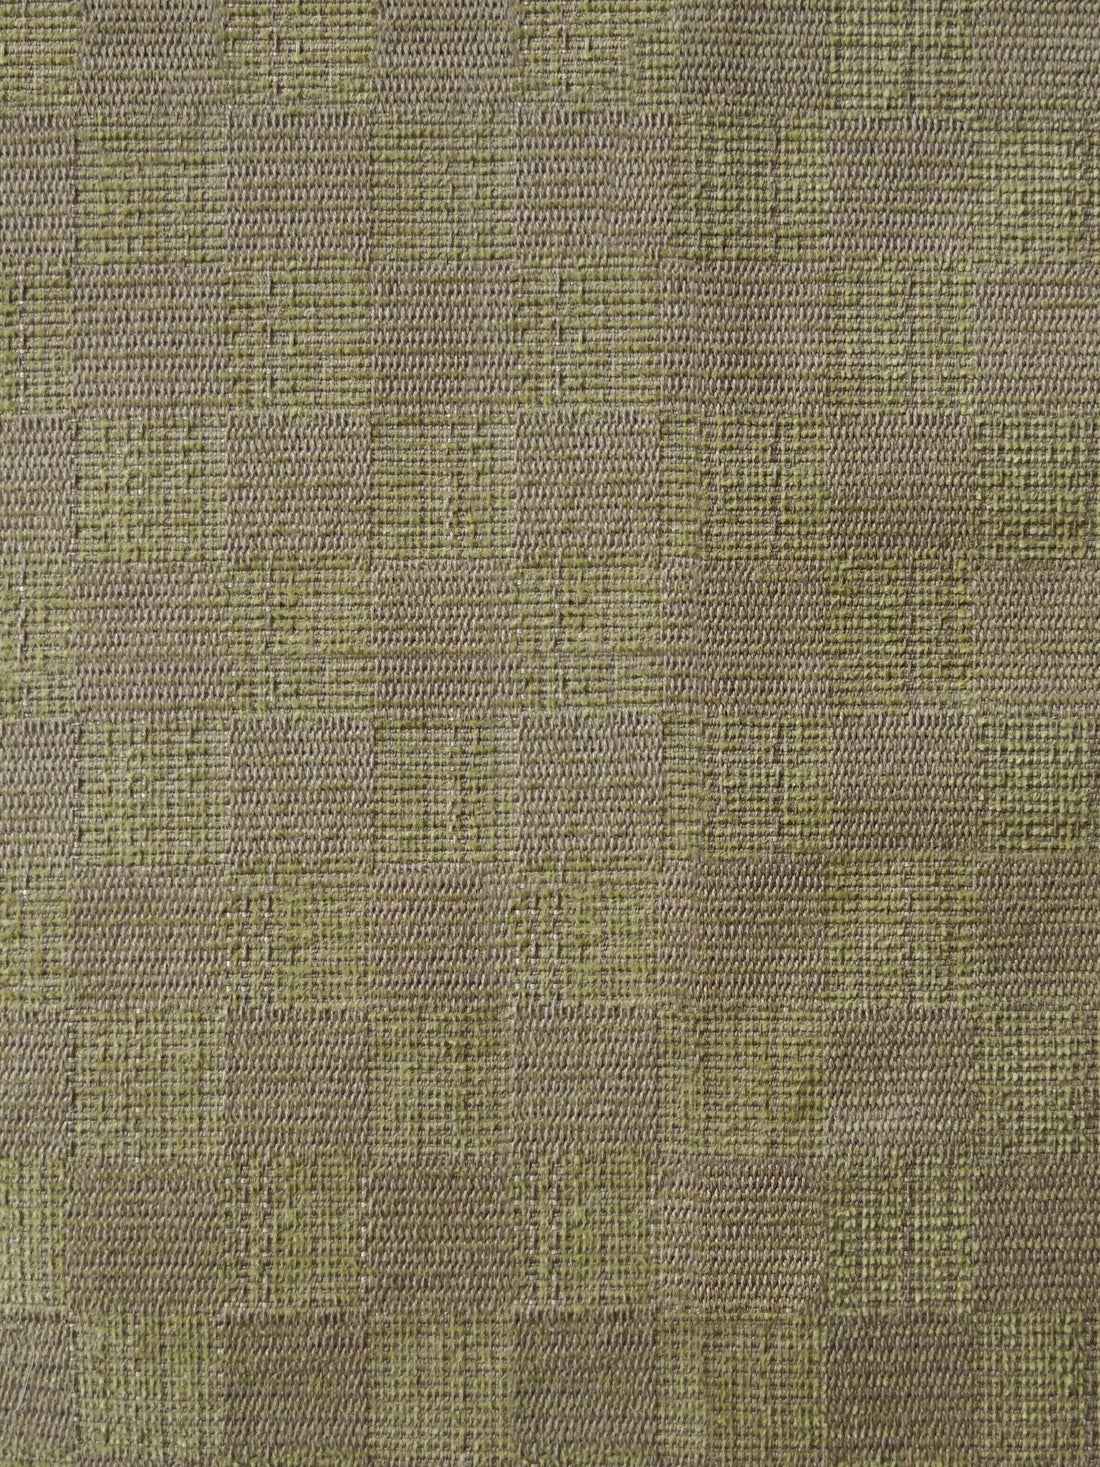 Crossroads fabric in moss color - pattern number RH 00061446 - by Scalamandre in the Old World Weavers collection